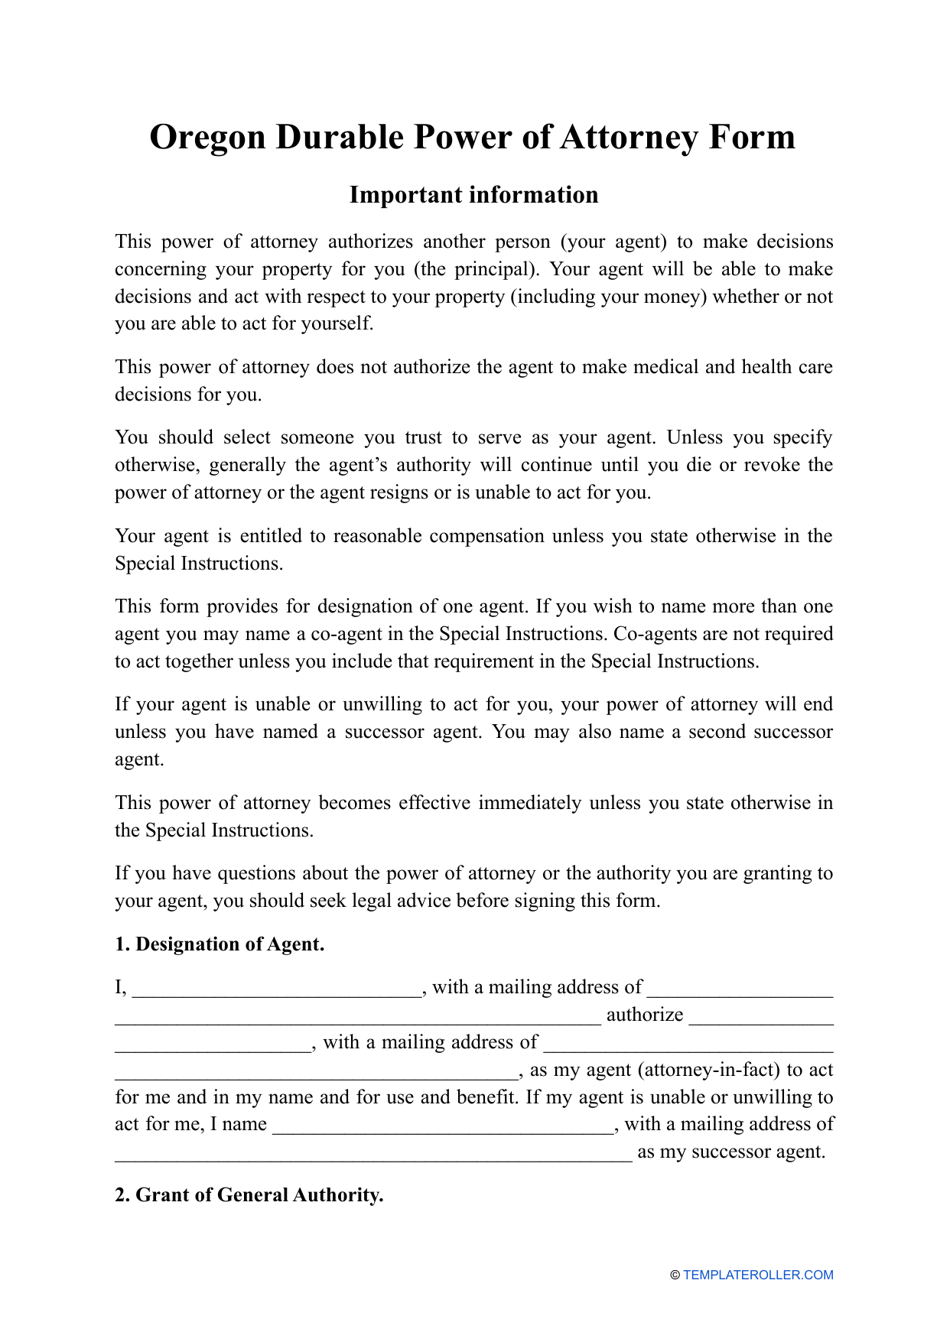 Durable Power of Attorney Form - Oregon, Page 1